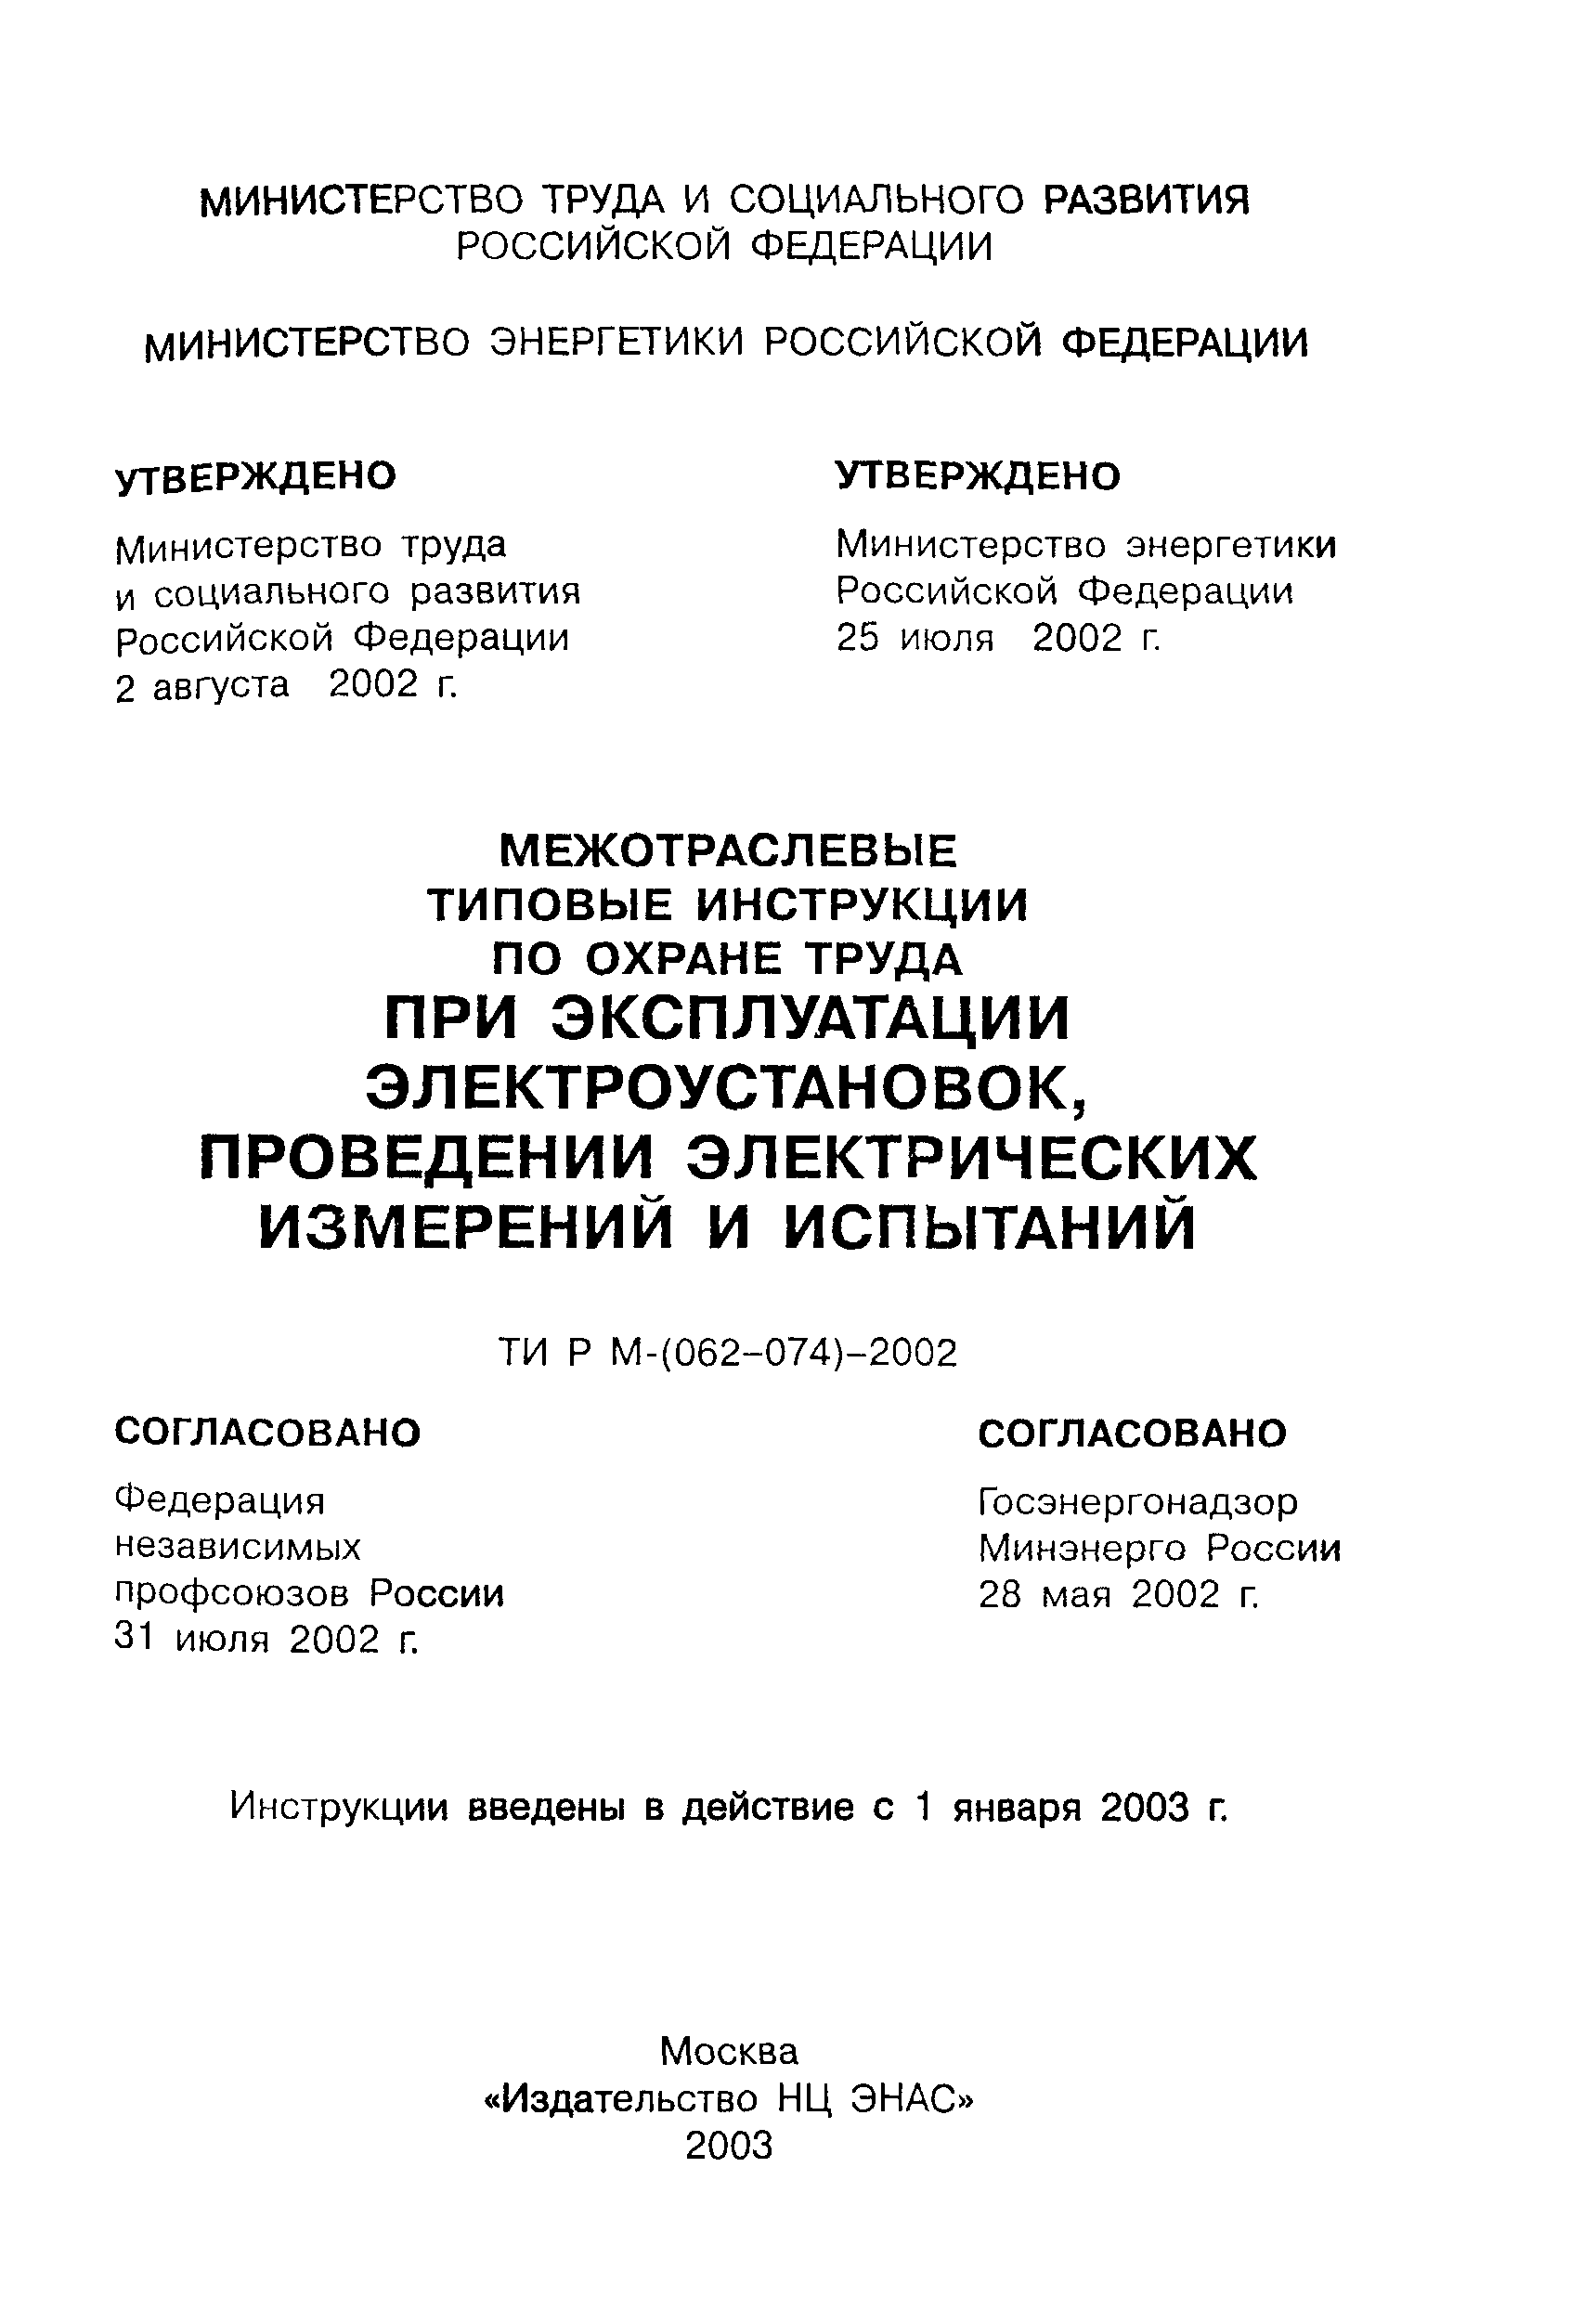 ТИ Р М-062-2002